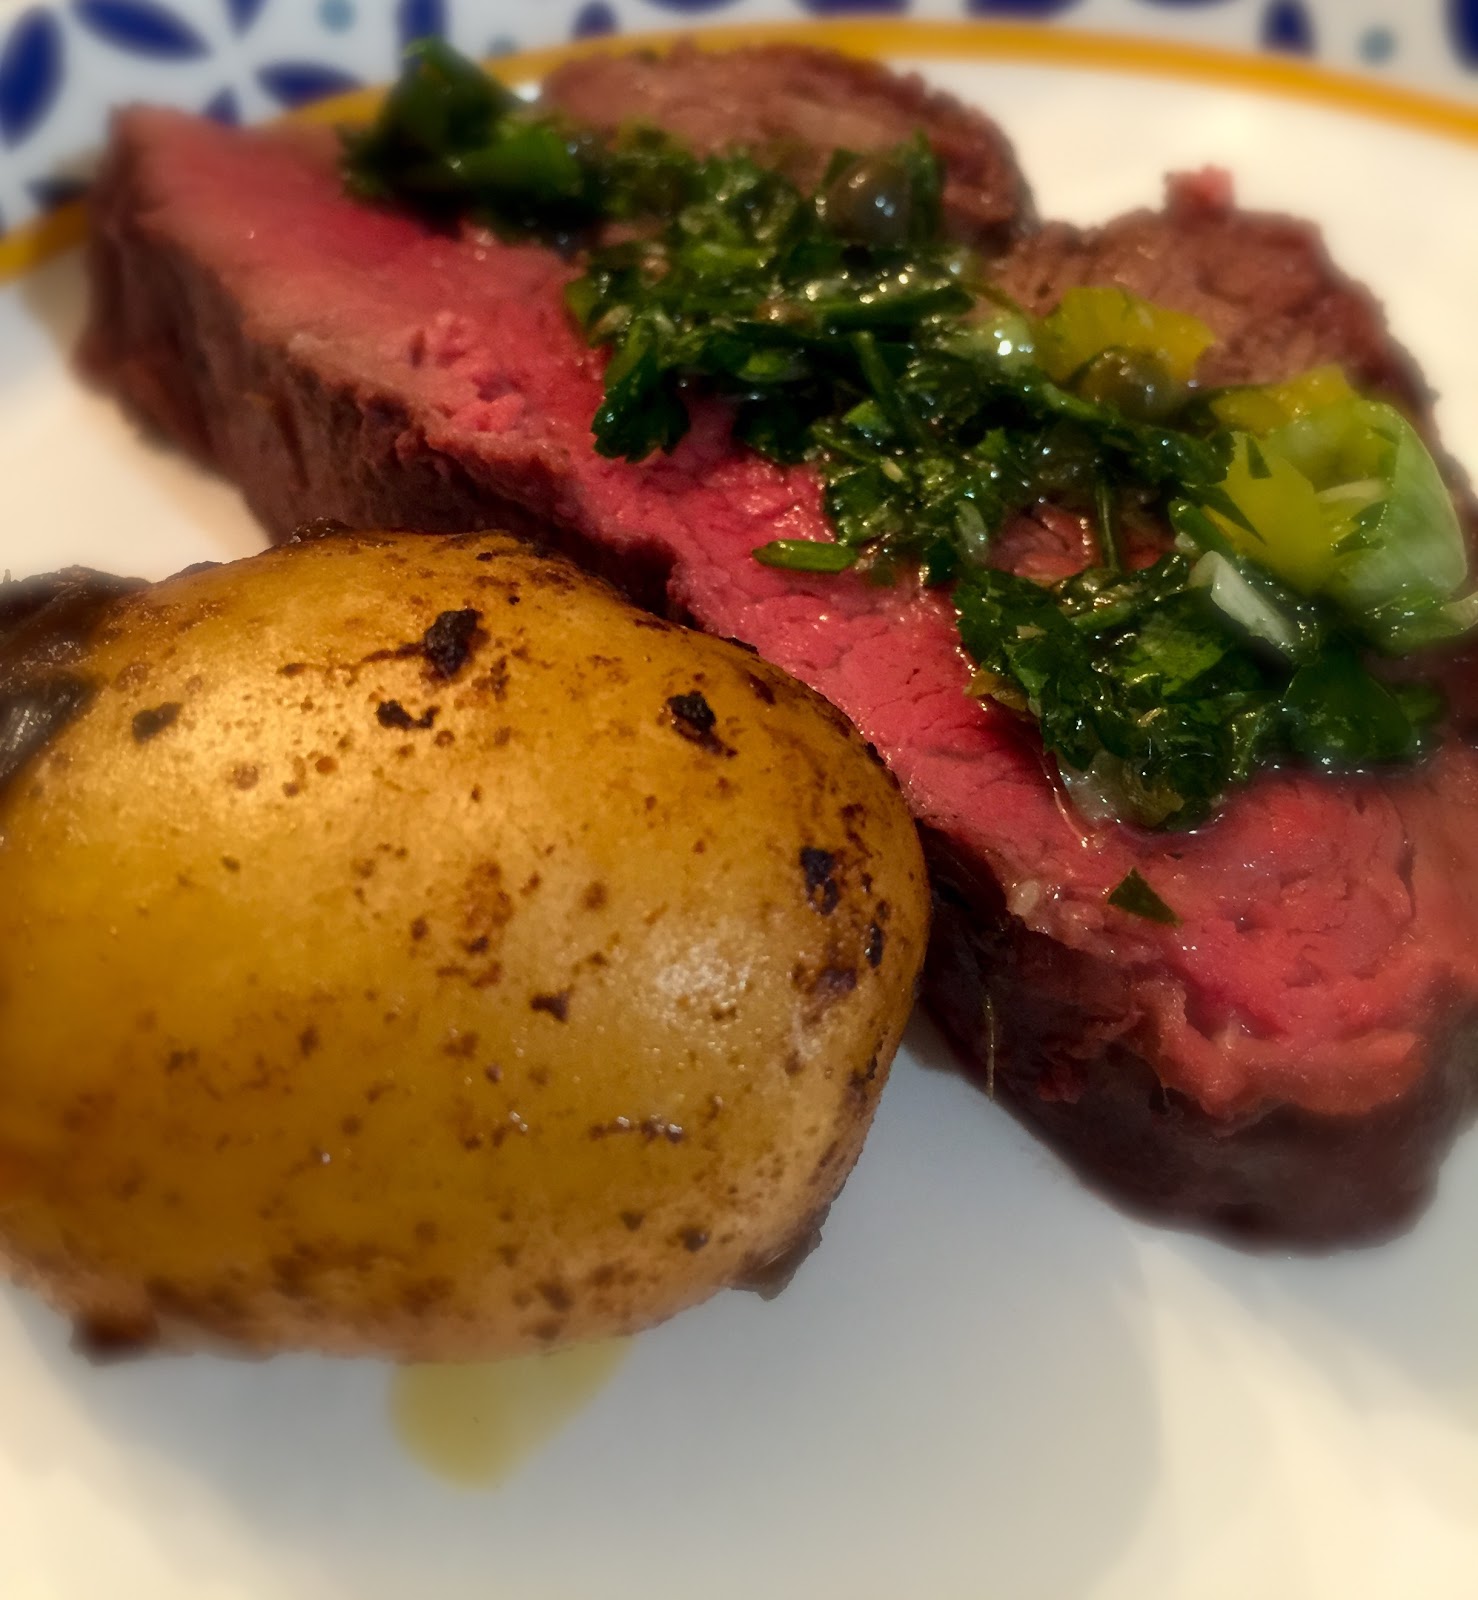 Ain't no cooking like Momma's: Beef Tenderloin with Persillade Relish